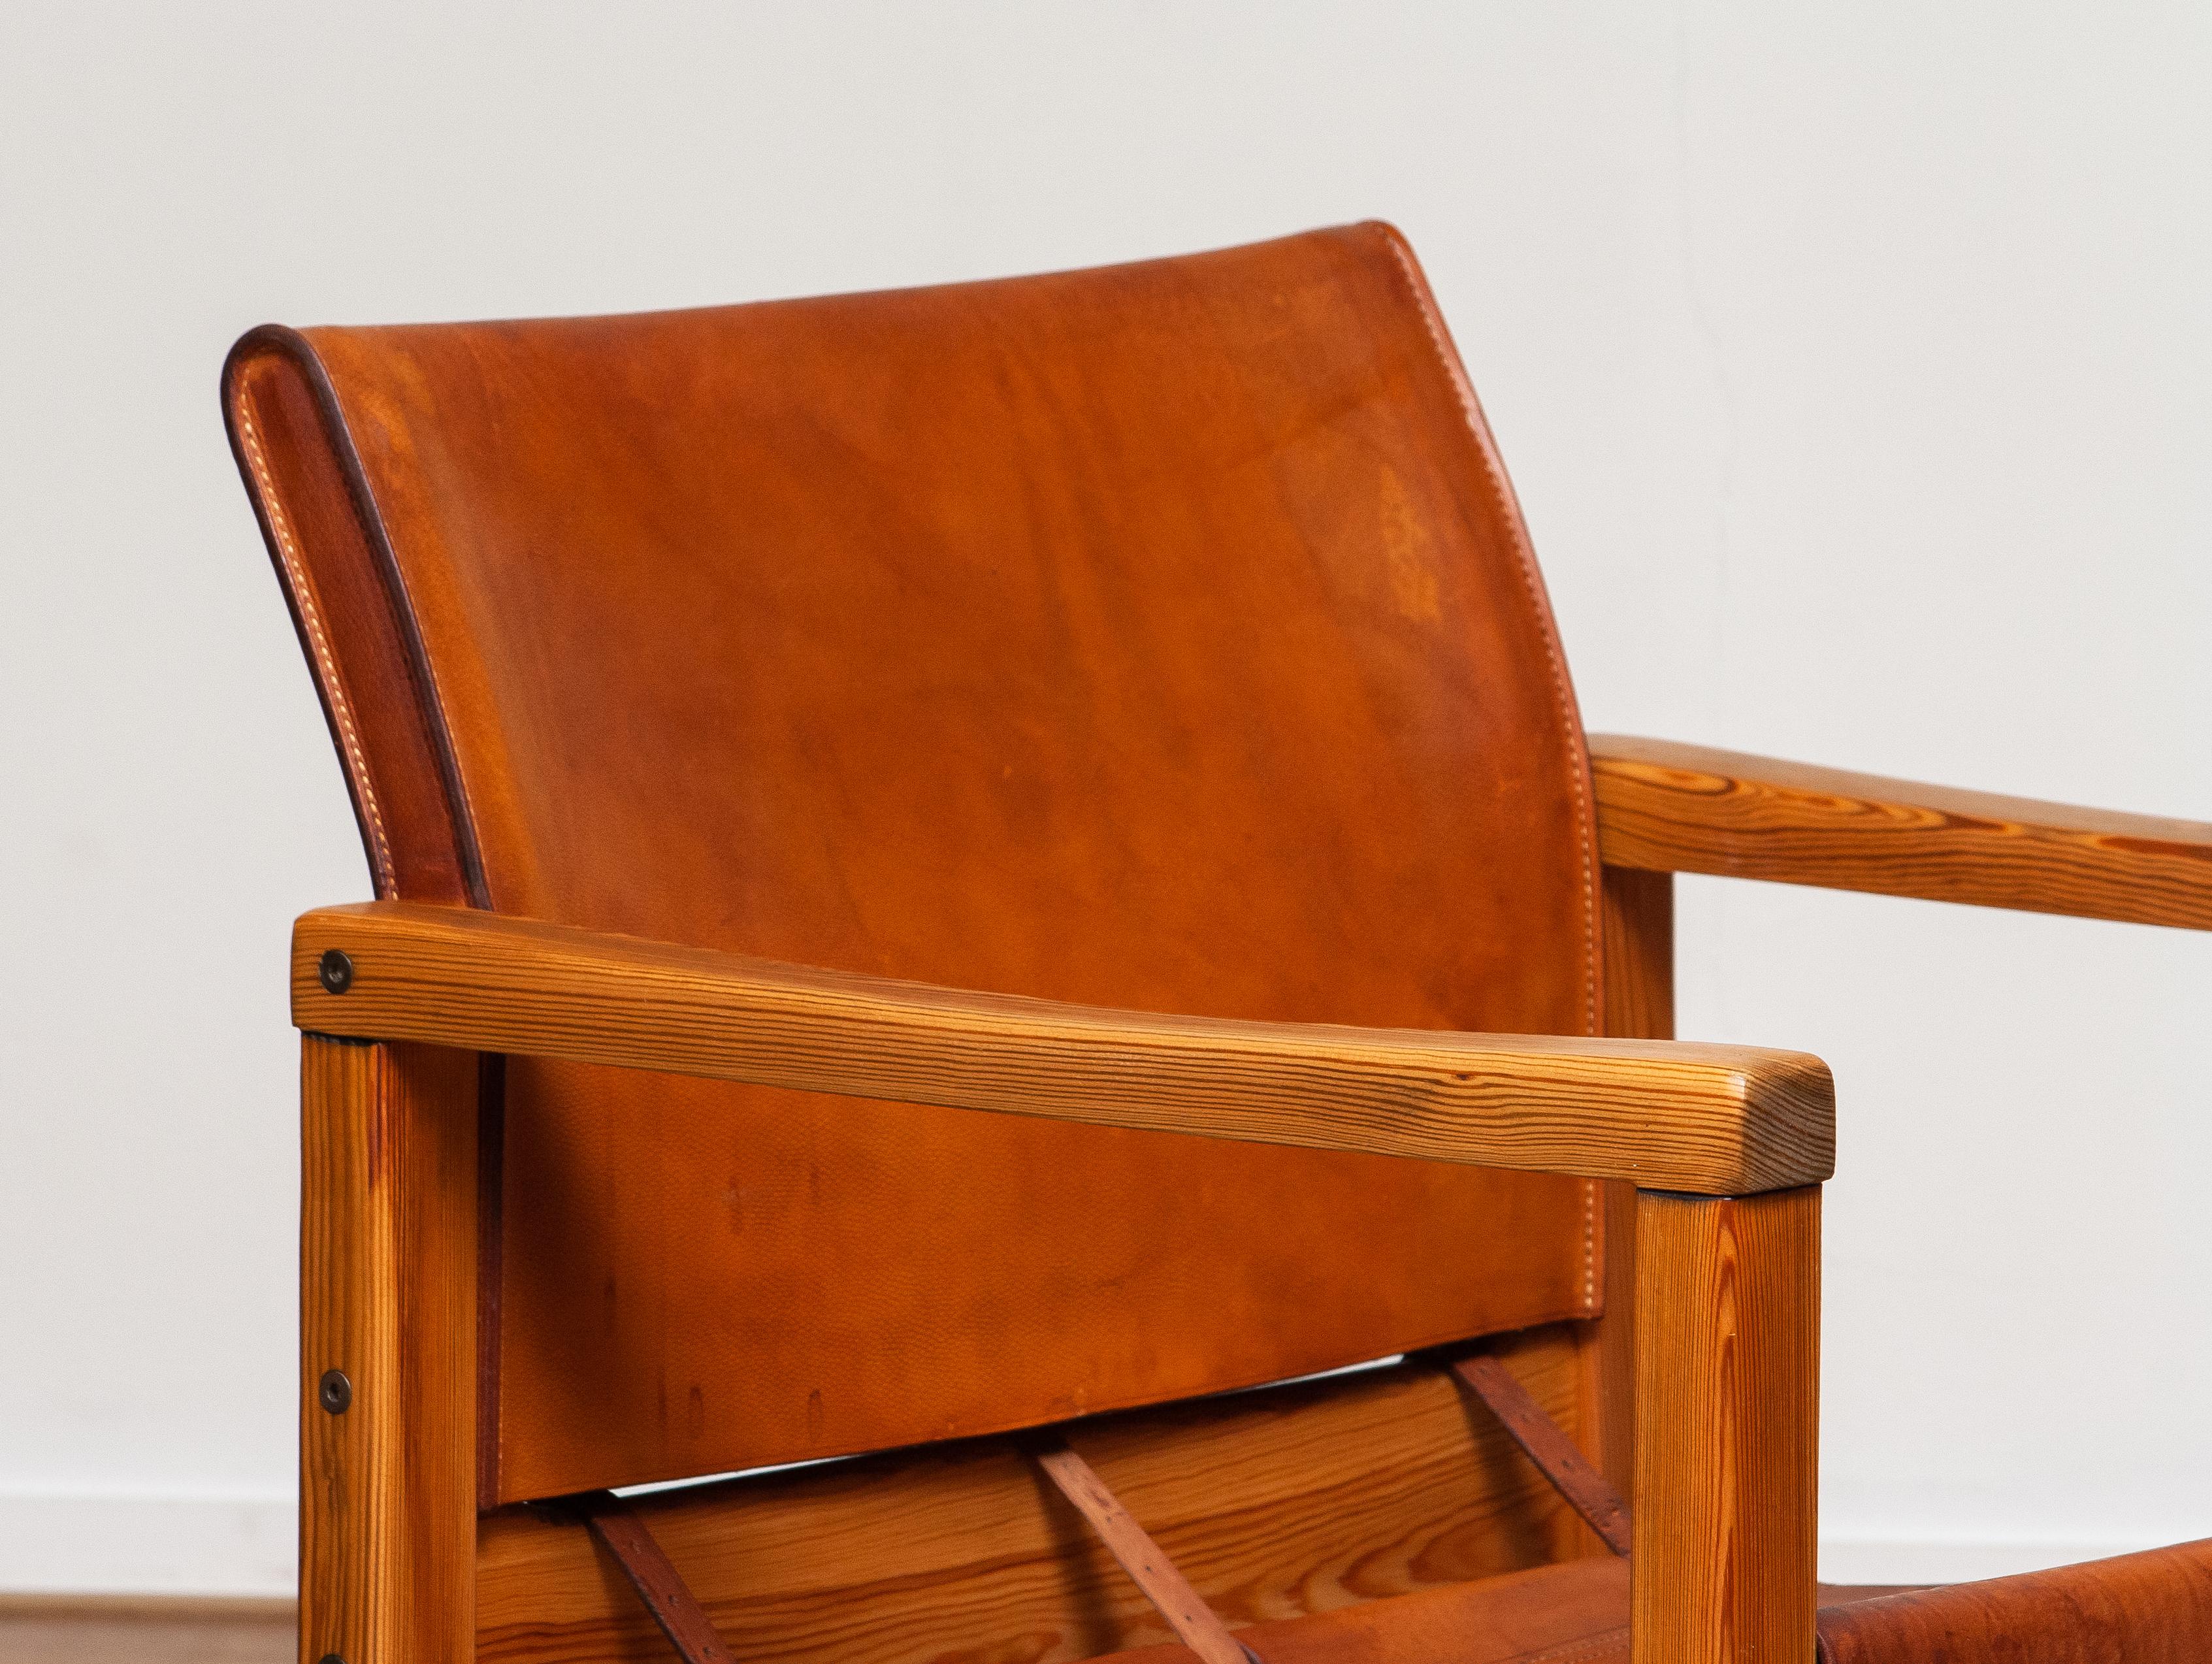 Swedish Cognac Leather Karin Mobring Safari Chair Model Diana by Ikea in Sweden, 1970s